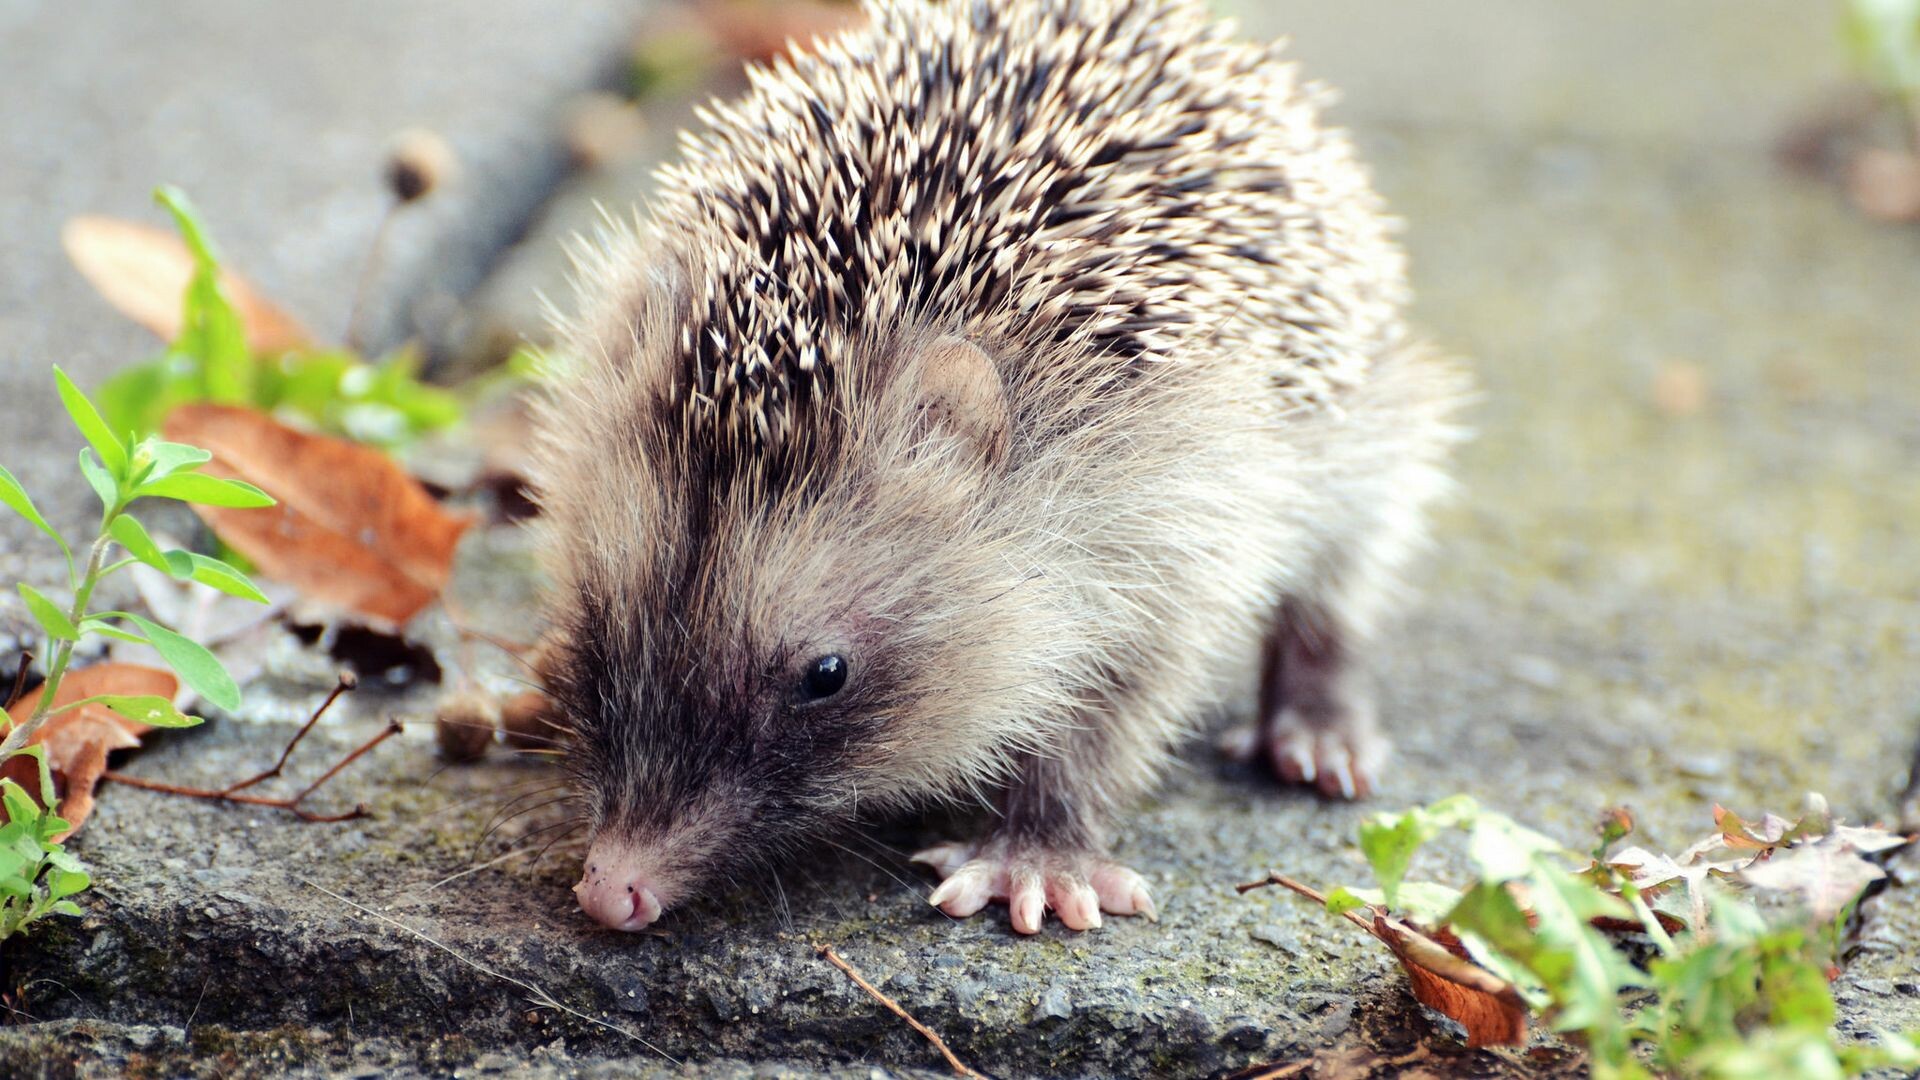 Hedgehog: Uses its quills to defend himself by curling into a ball. 1920x1080 Full HD Wallpaper.